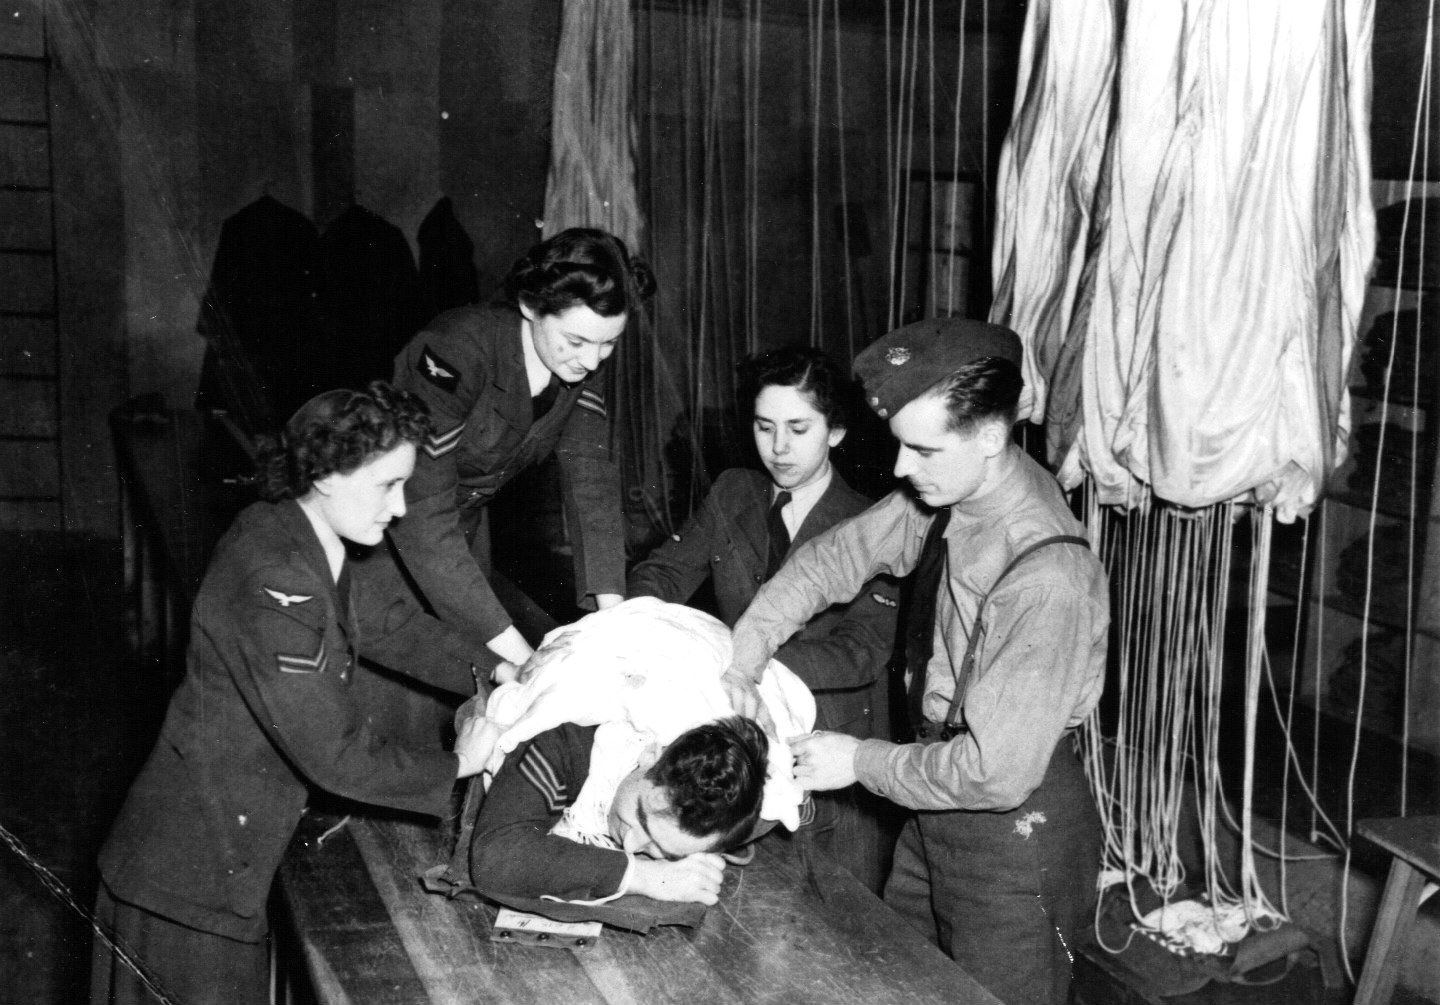 3 airwomen and one airman assisting another airman wrapped in a parachute on a table